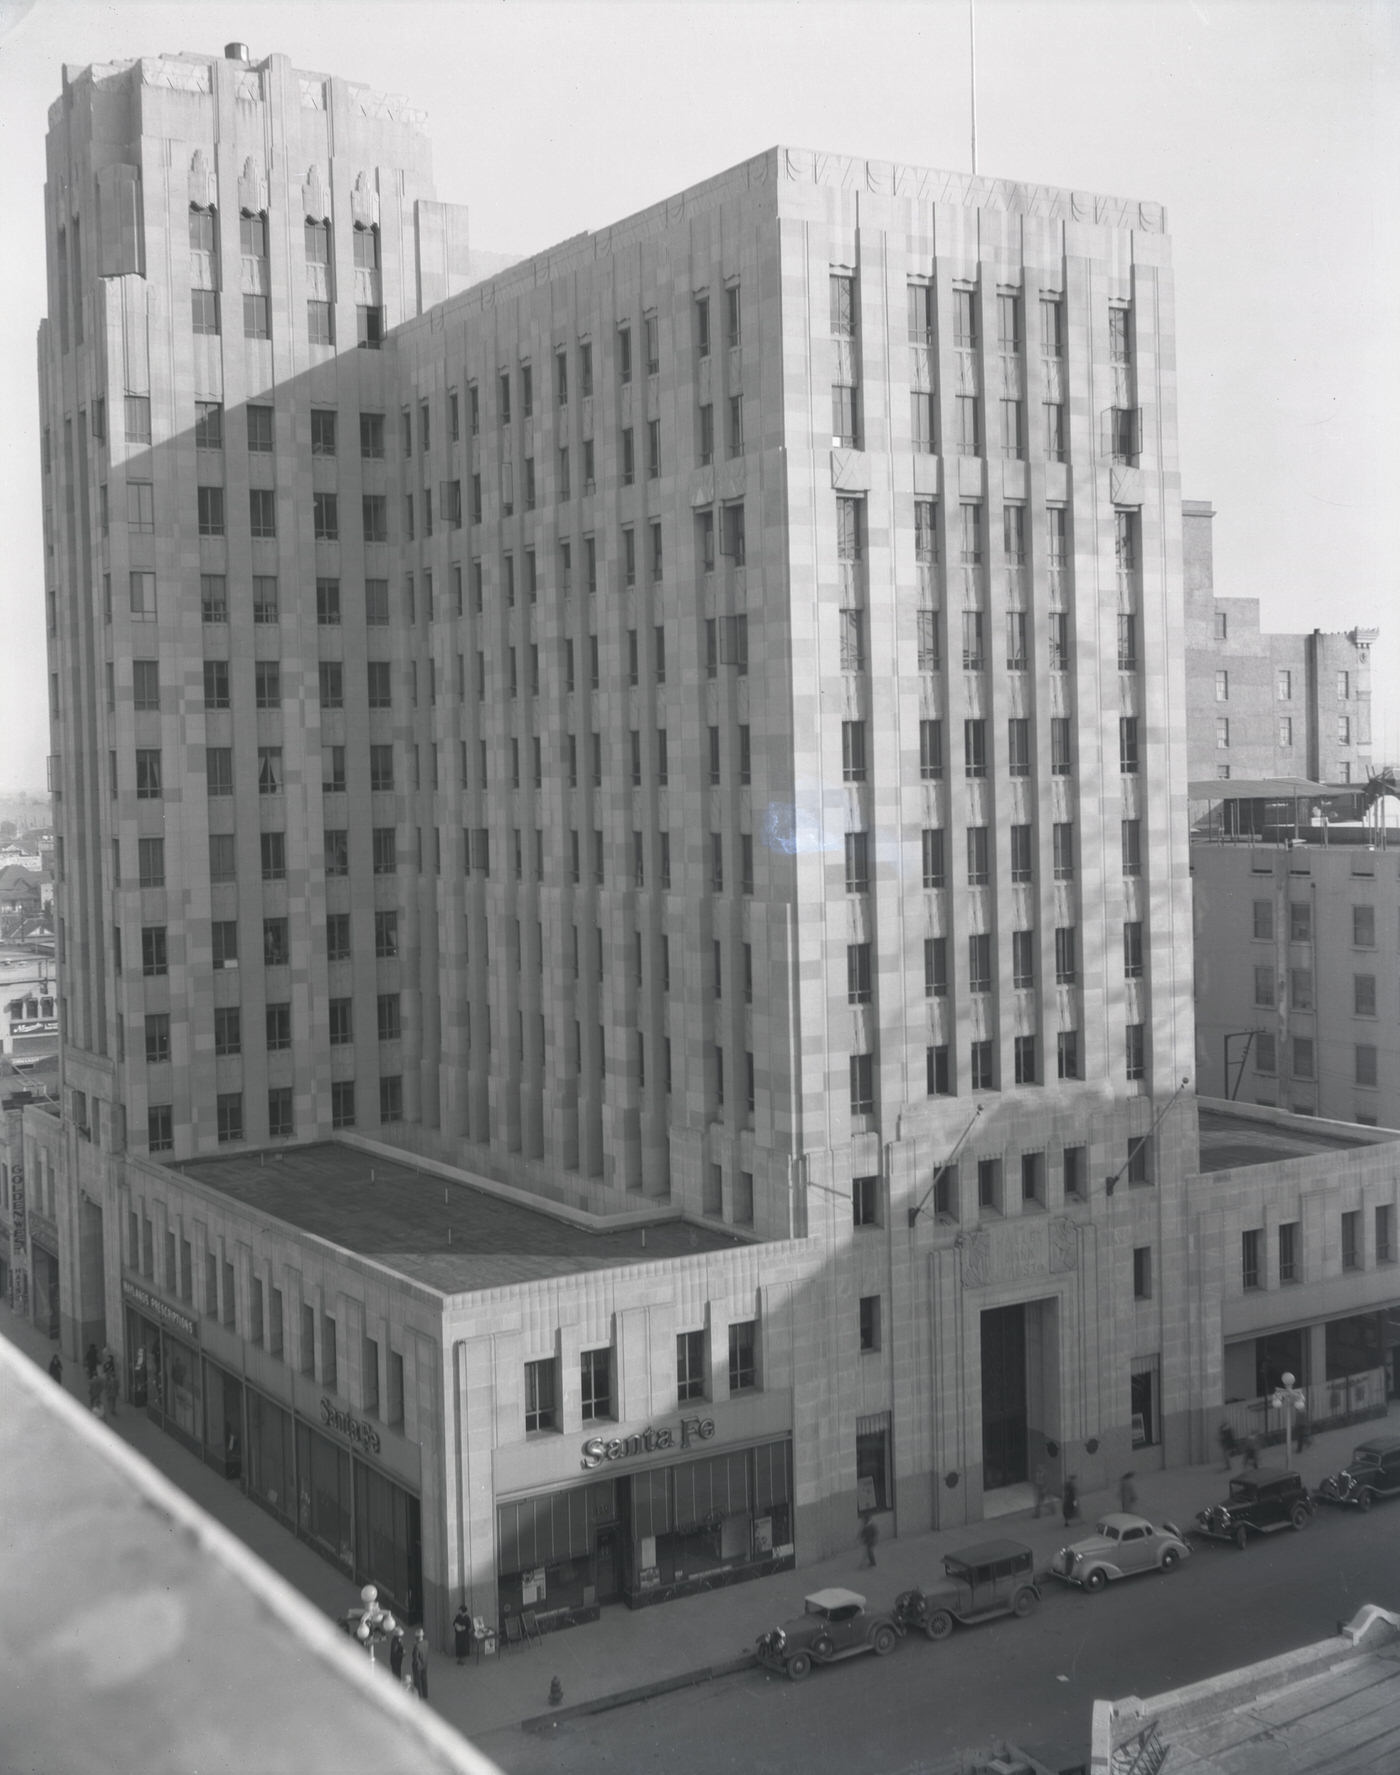 Professional Building Exterior, 1930s. This building was located on the corner of Central Ave. and Monroe Rd. in Phoenix.